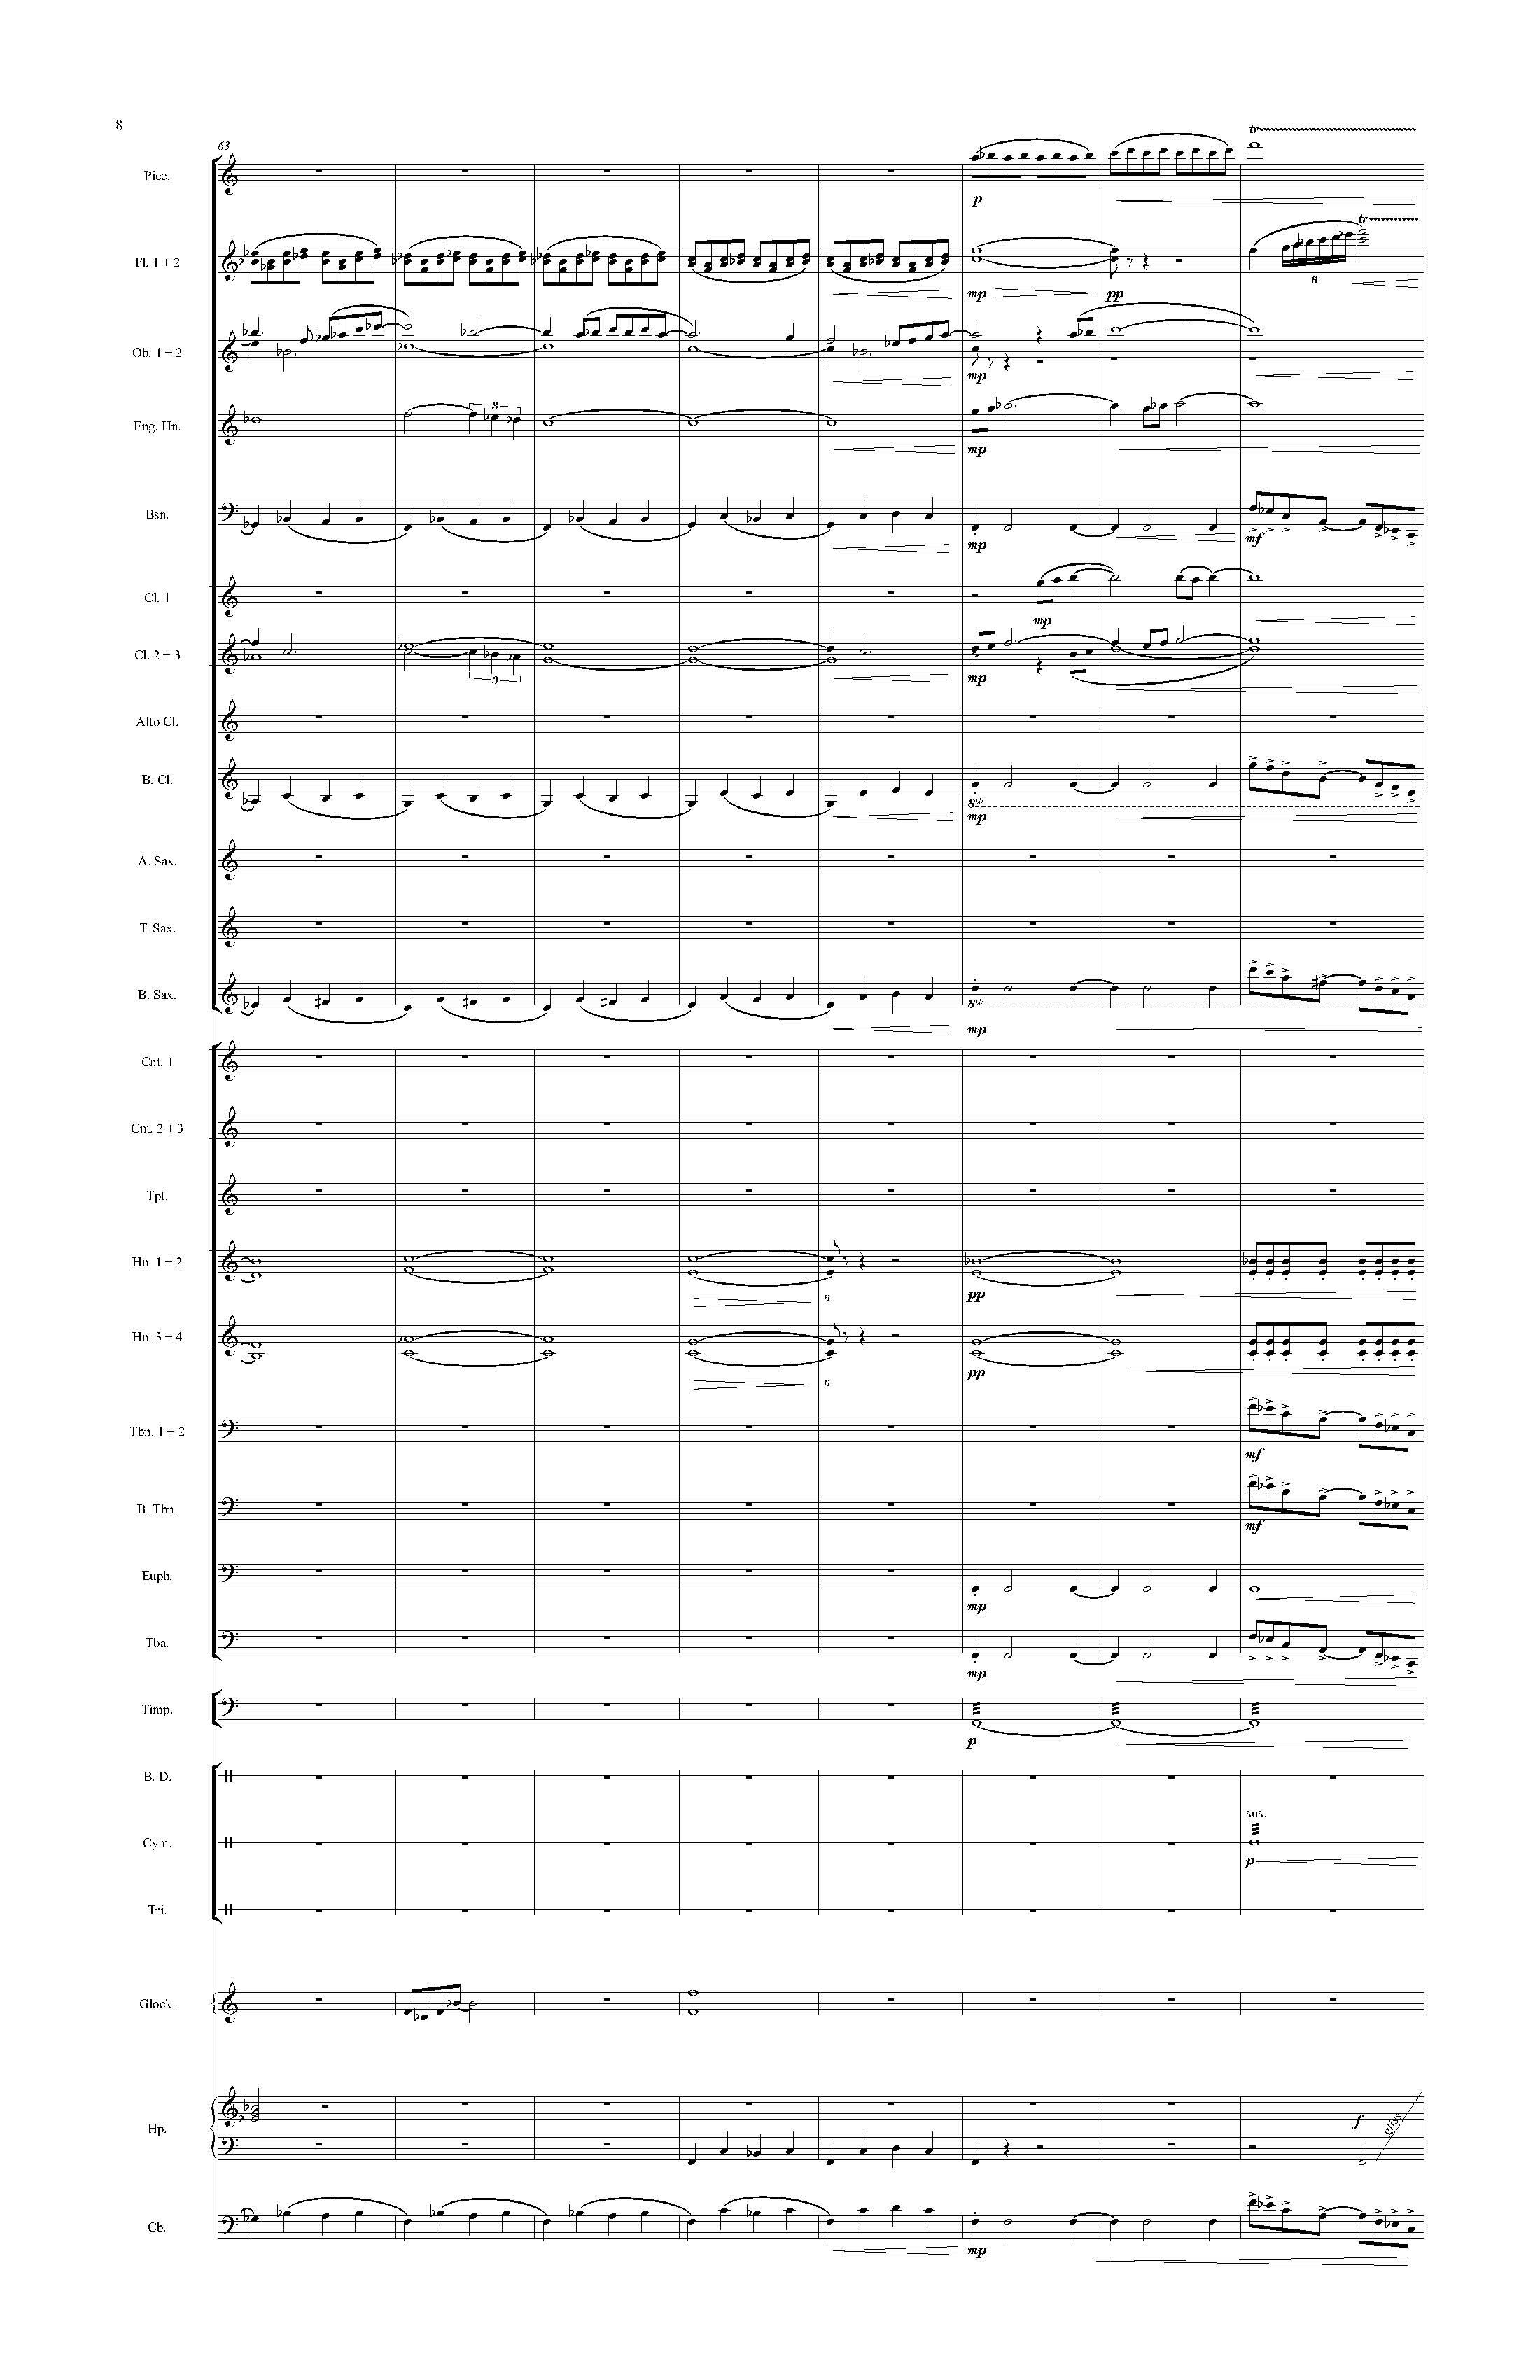 Psyche - Complete Score_Page_14.jpg